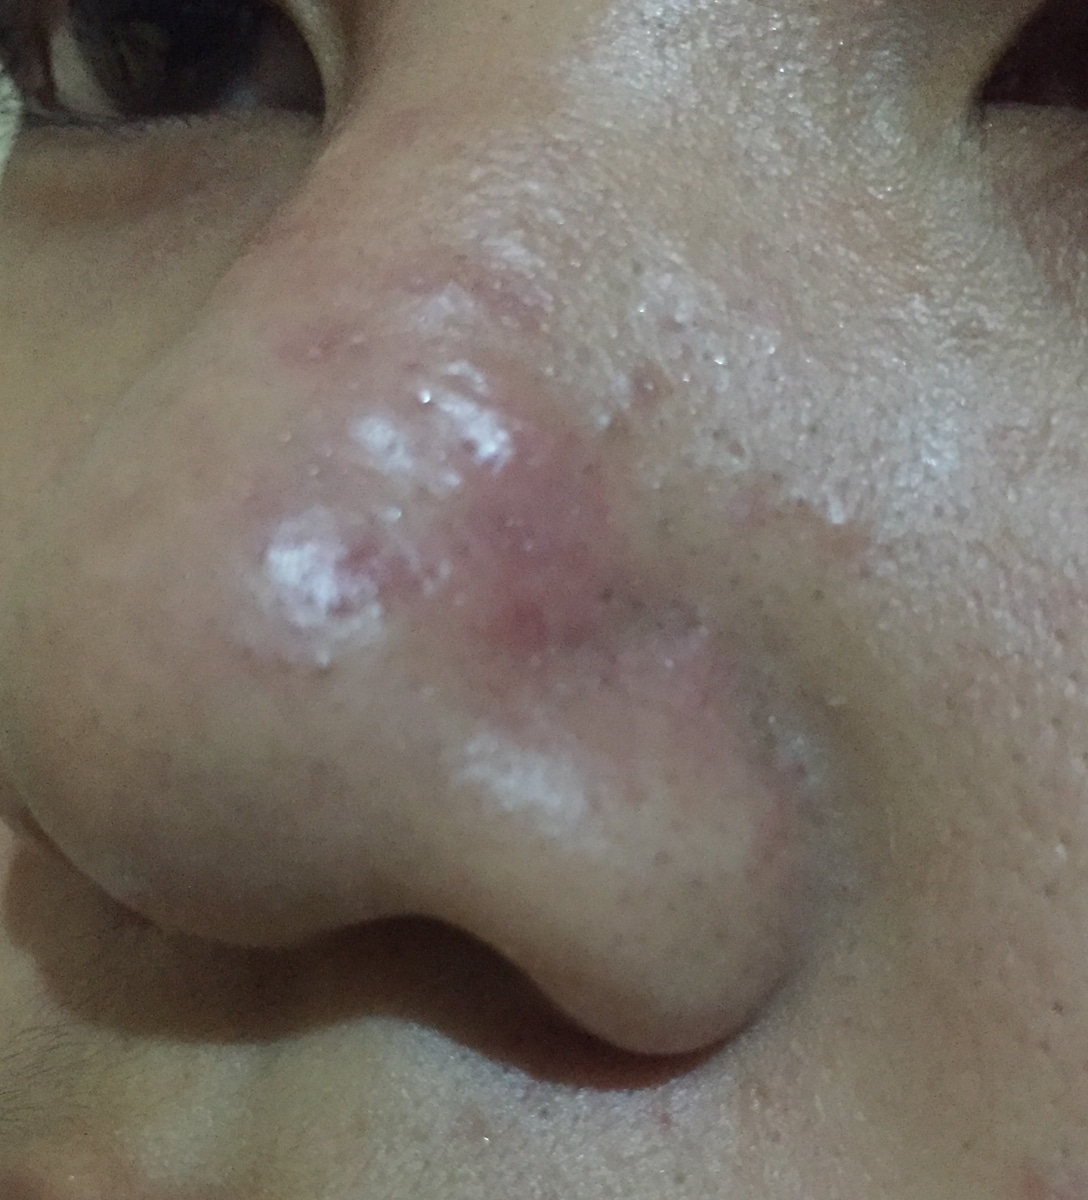 Acne scars and bumps on nose